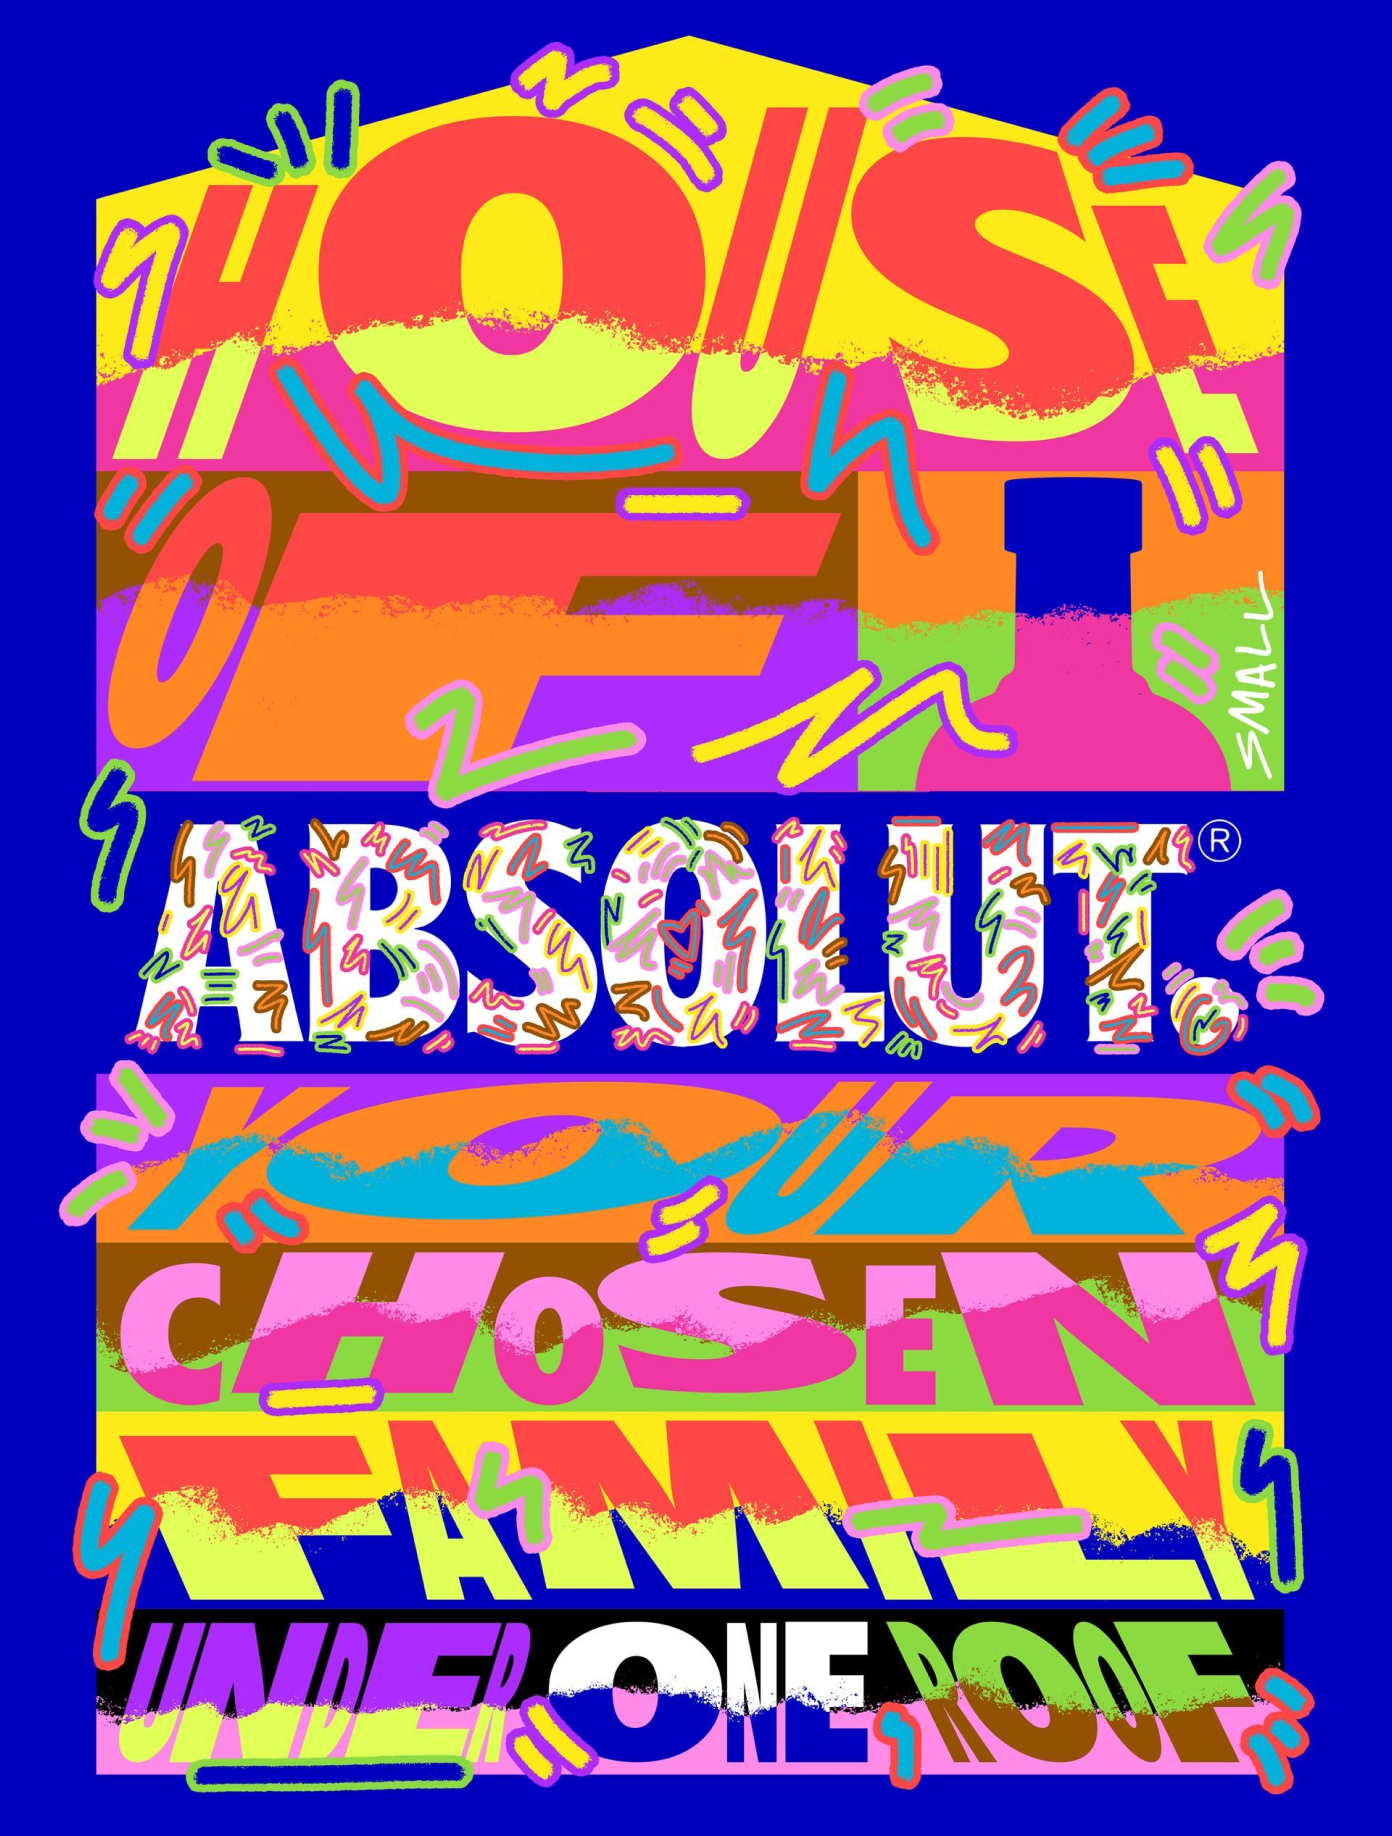 Bright coloured text artwork created by Kris Andrew Small for Absolut